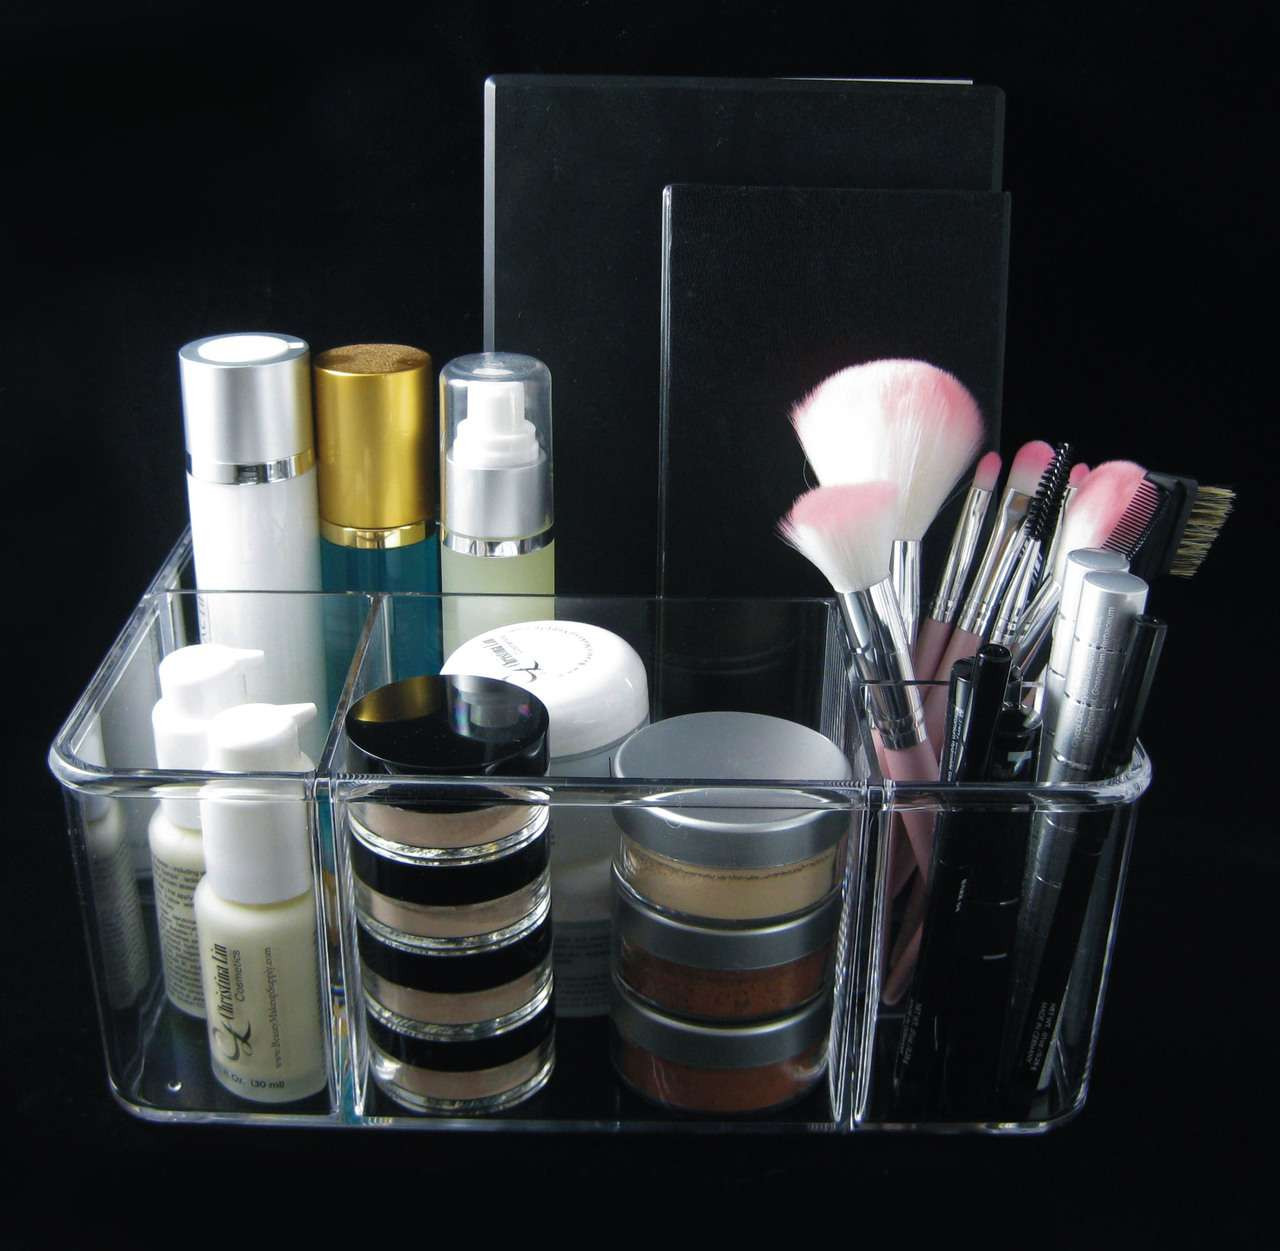 https://cdn11.bigcommerce.com/s-qd7k5gxi/images/stencil/1280x1280/products/289/6668/Stackable-Acrylic-5-Compartment-Cosmetic-Beauty-Organizers-5682-Beauty-Makeup-Supply_4018__02046.1661383839.jpg?c=2